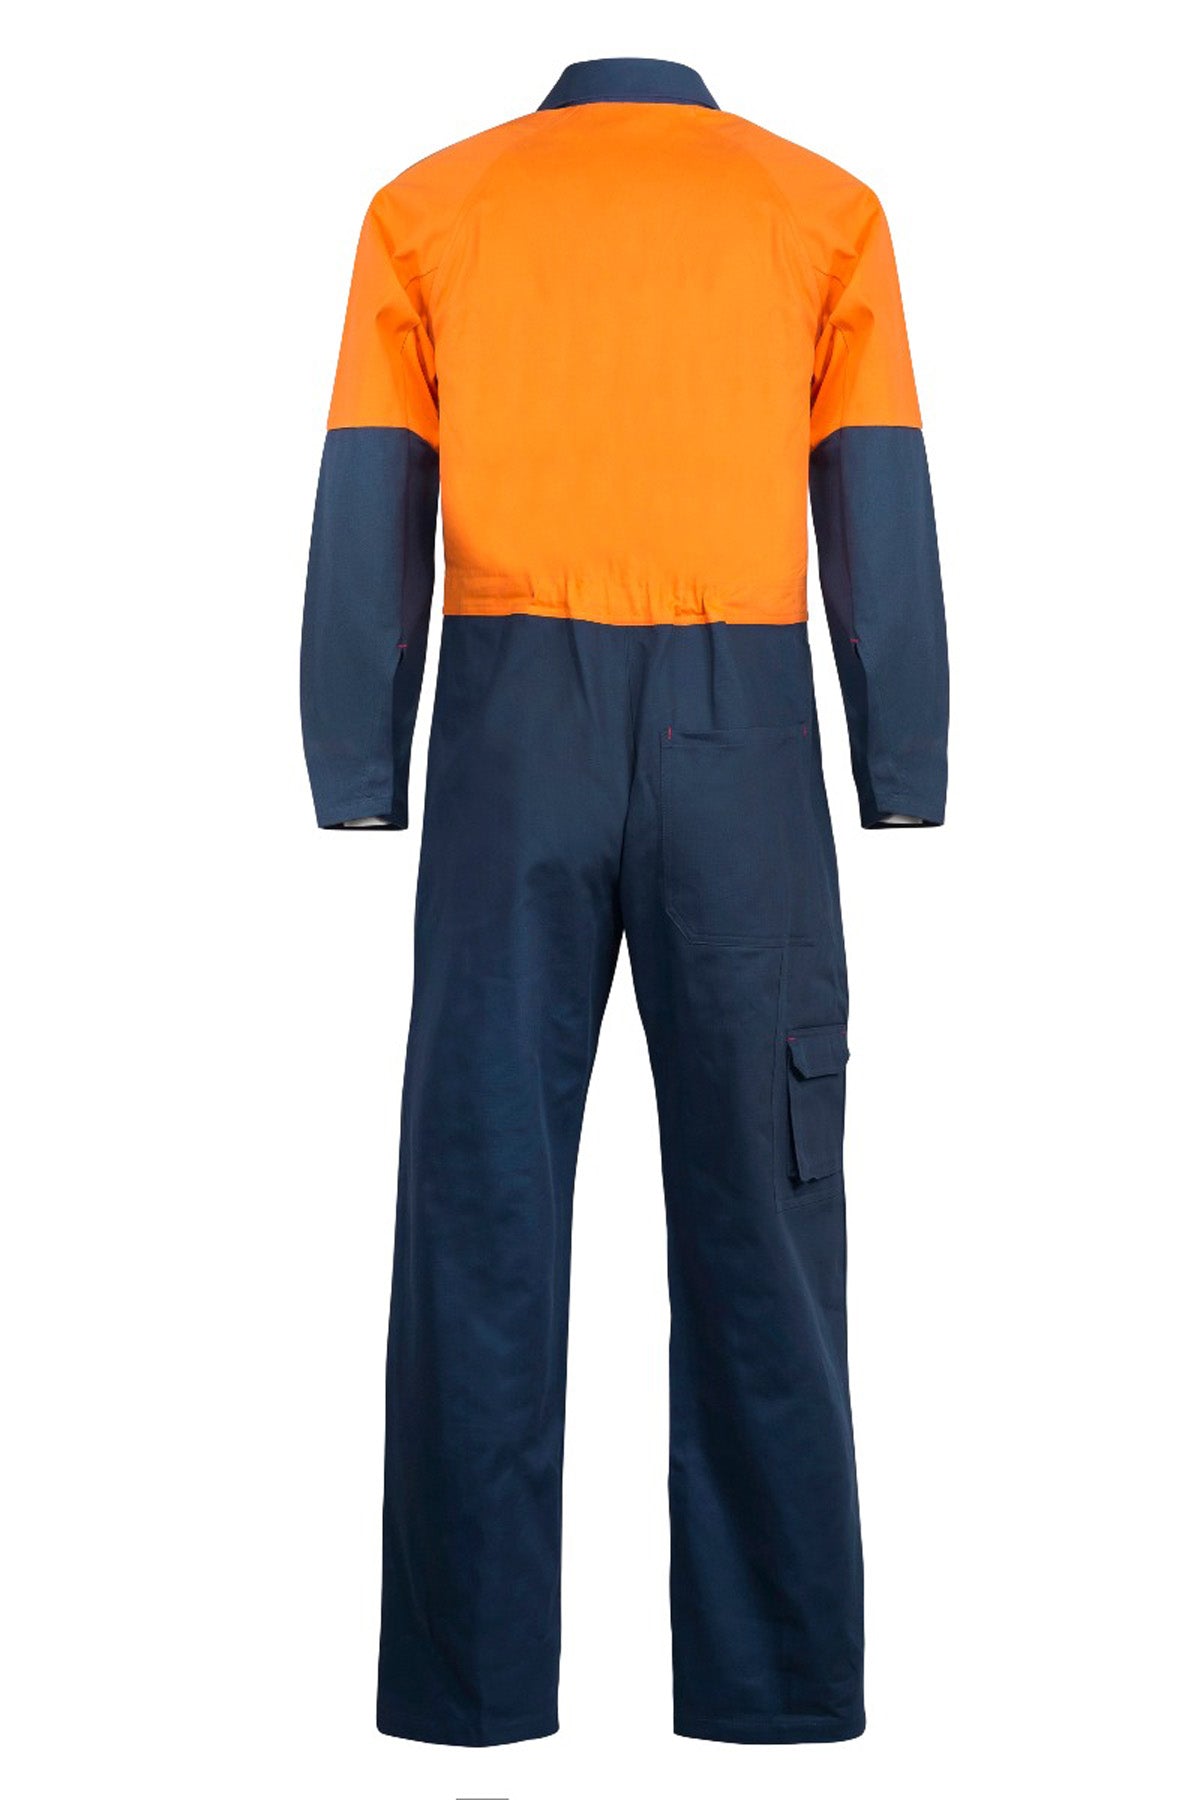 Workcraft WC3051 Hi-Vis Two Tone Cotton Drill Overalls